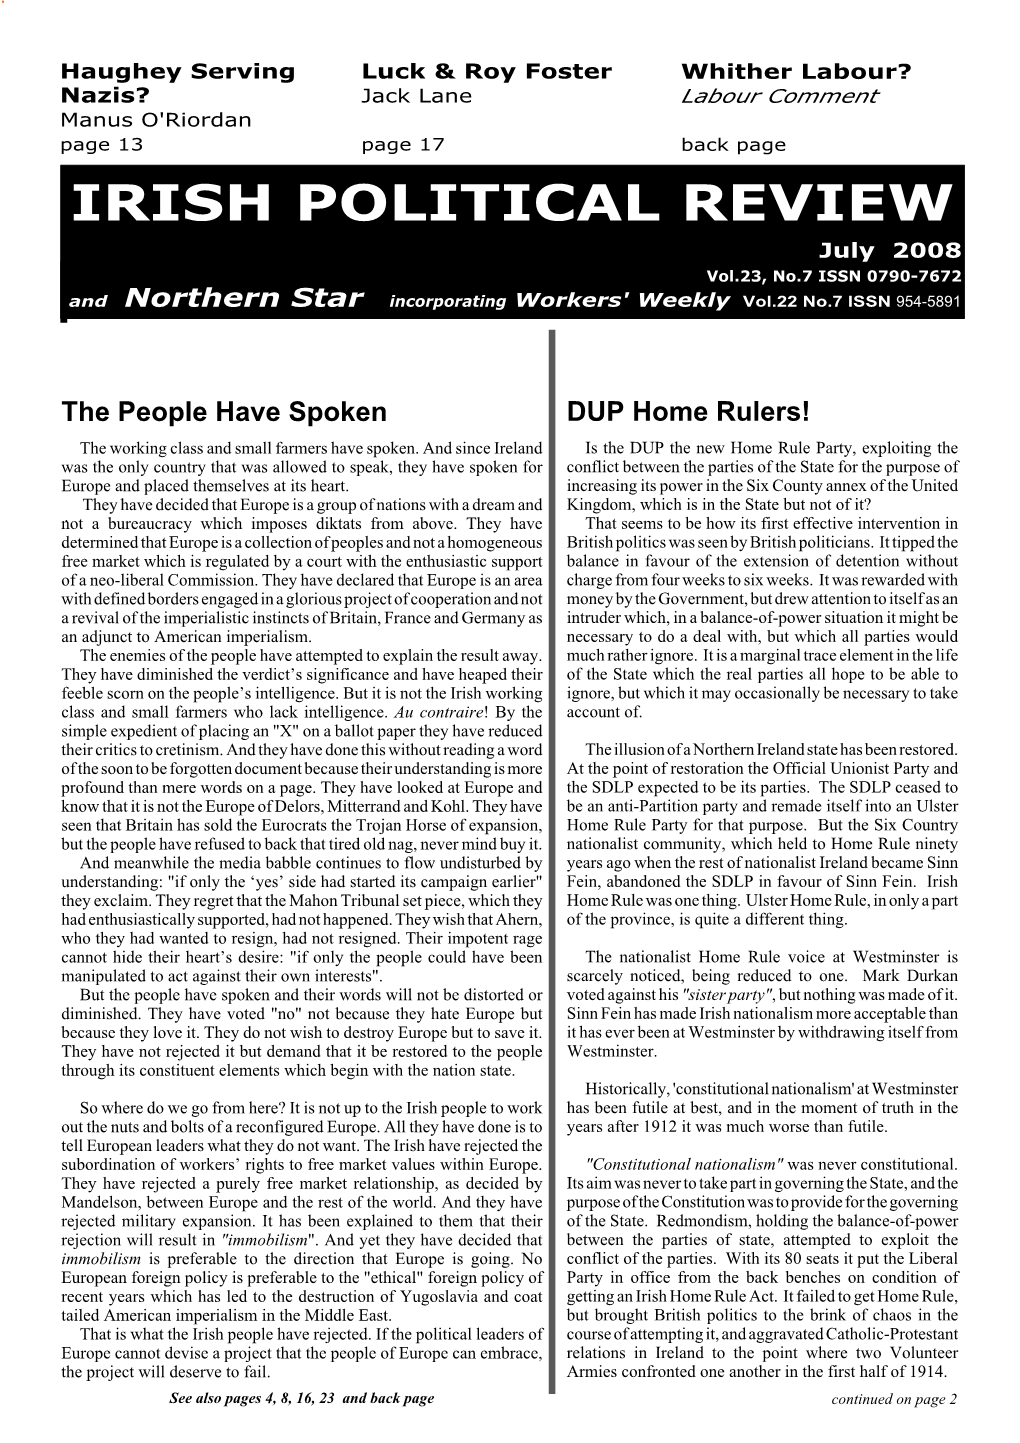 Irish Political Review, July 2008